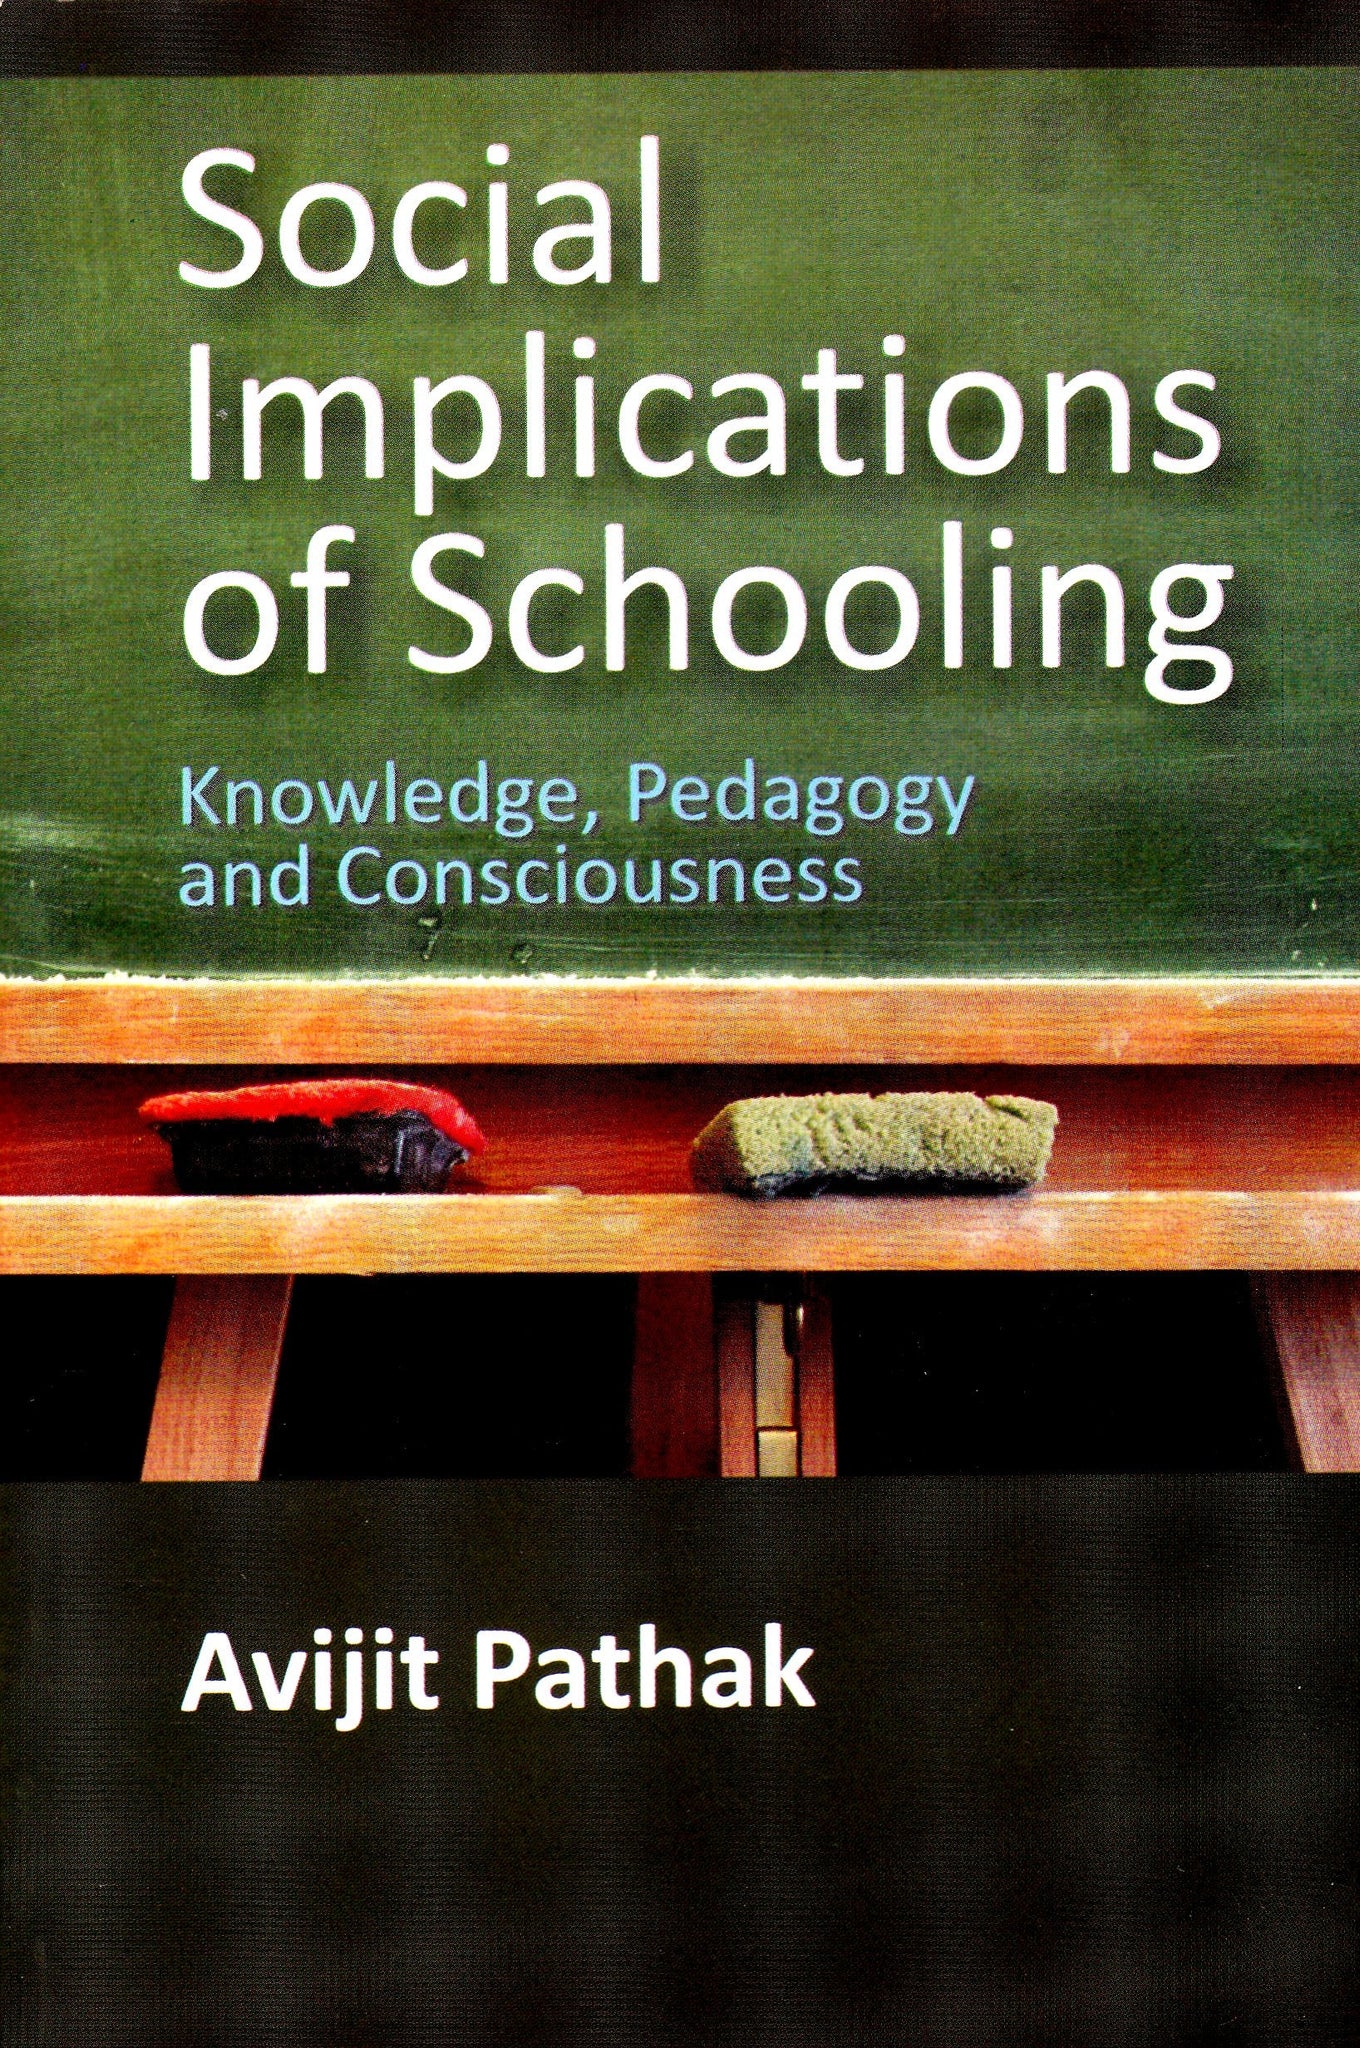 Social Implications of Schooling: Knowledge, Pedagogy and Consciousness